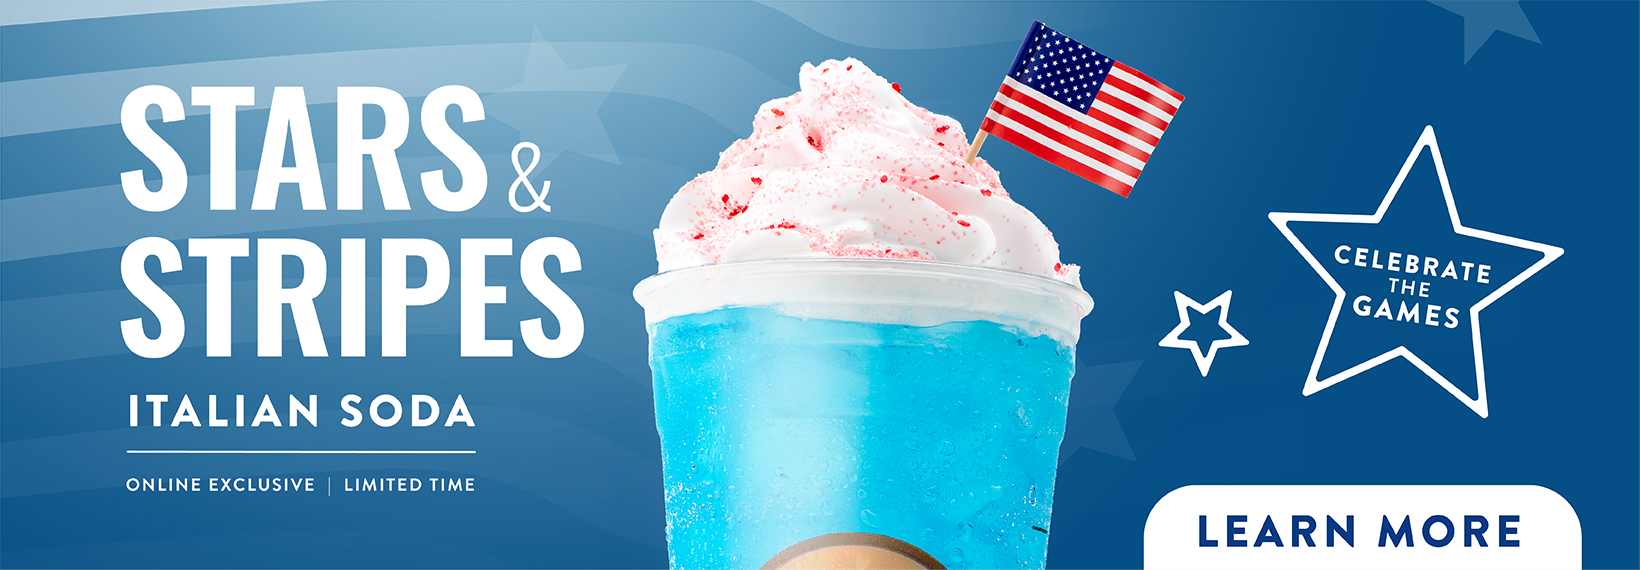 Stars and Stripes web banner